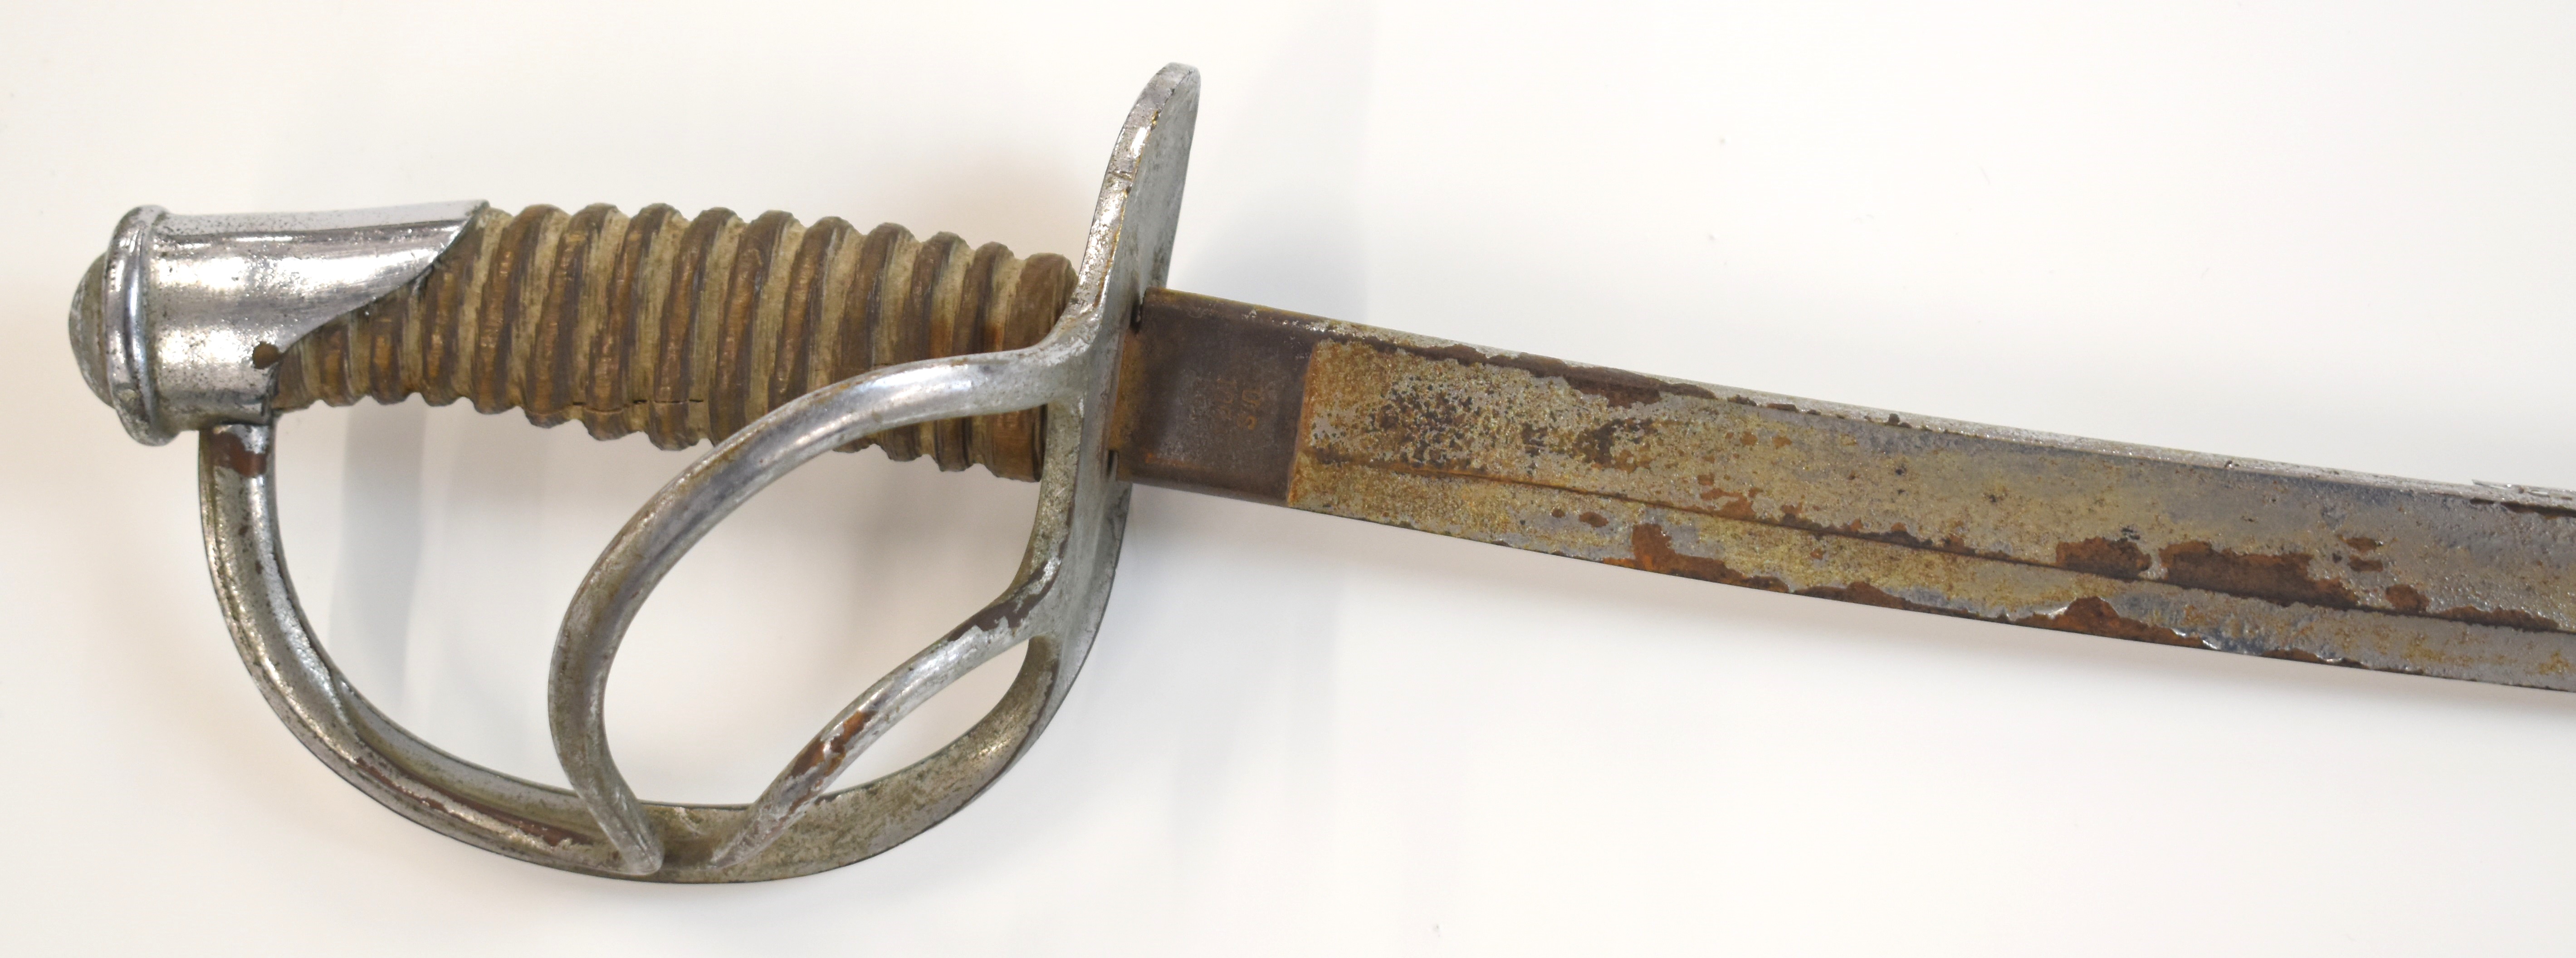 American Civil War sword with wooden grip, two bar hilt, US 1864 AGM to ricasso and Crosby - Image 7 of 26